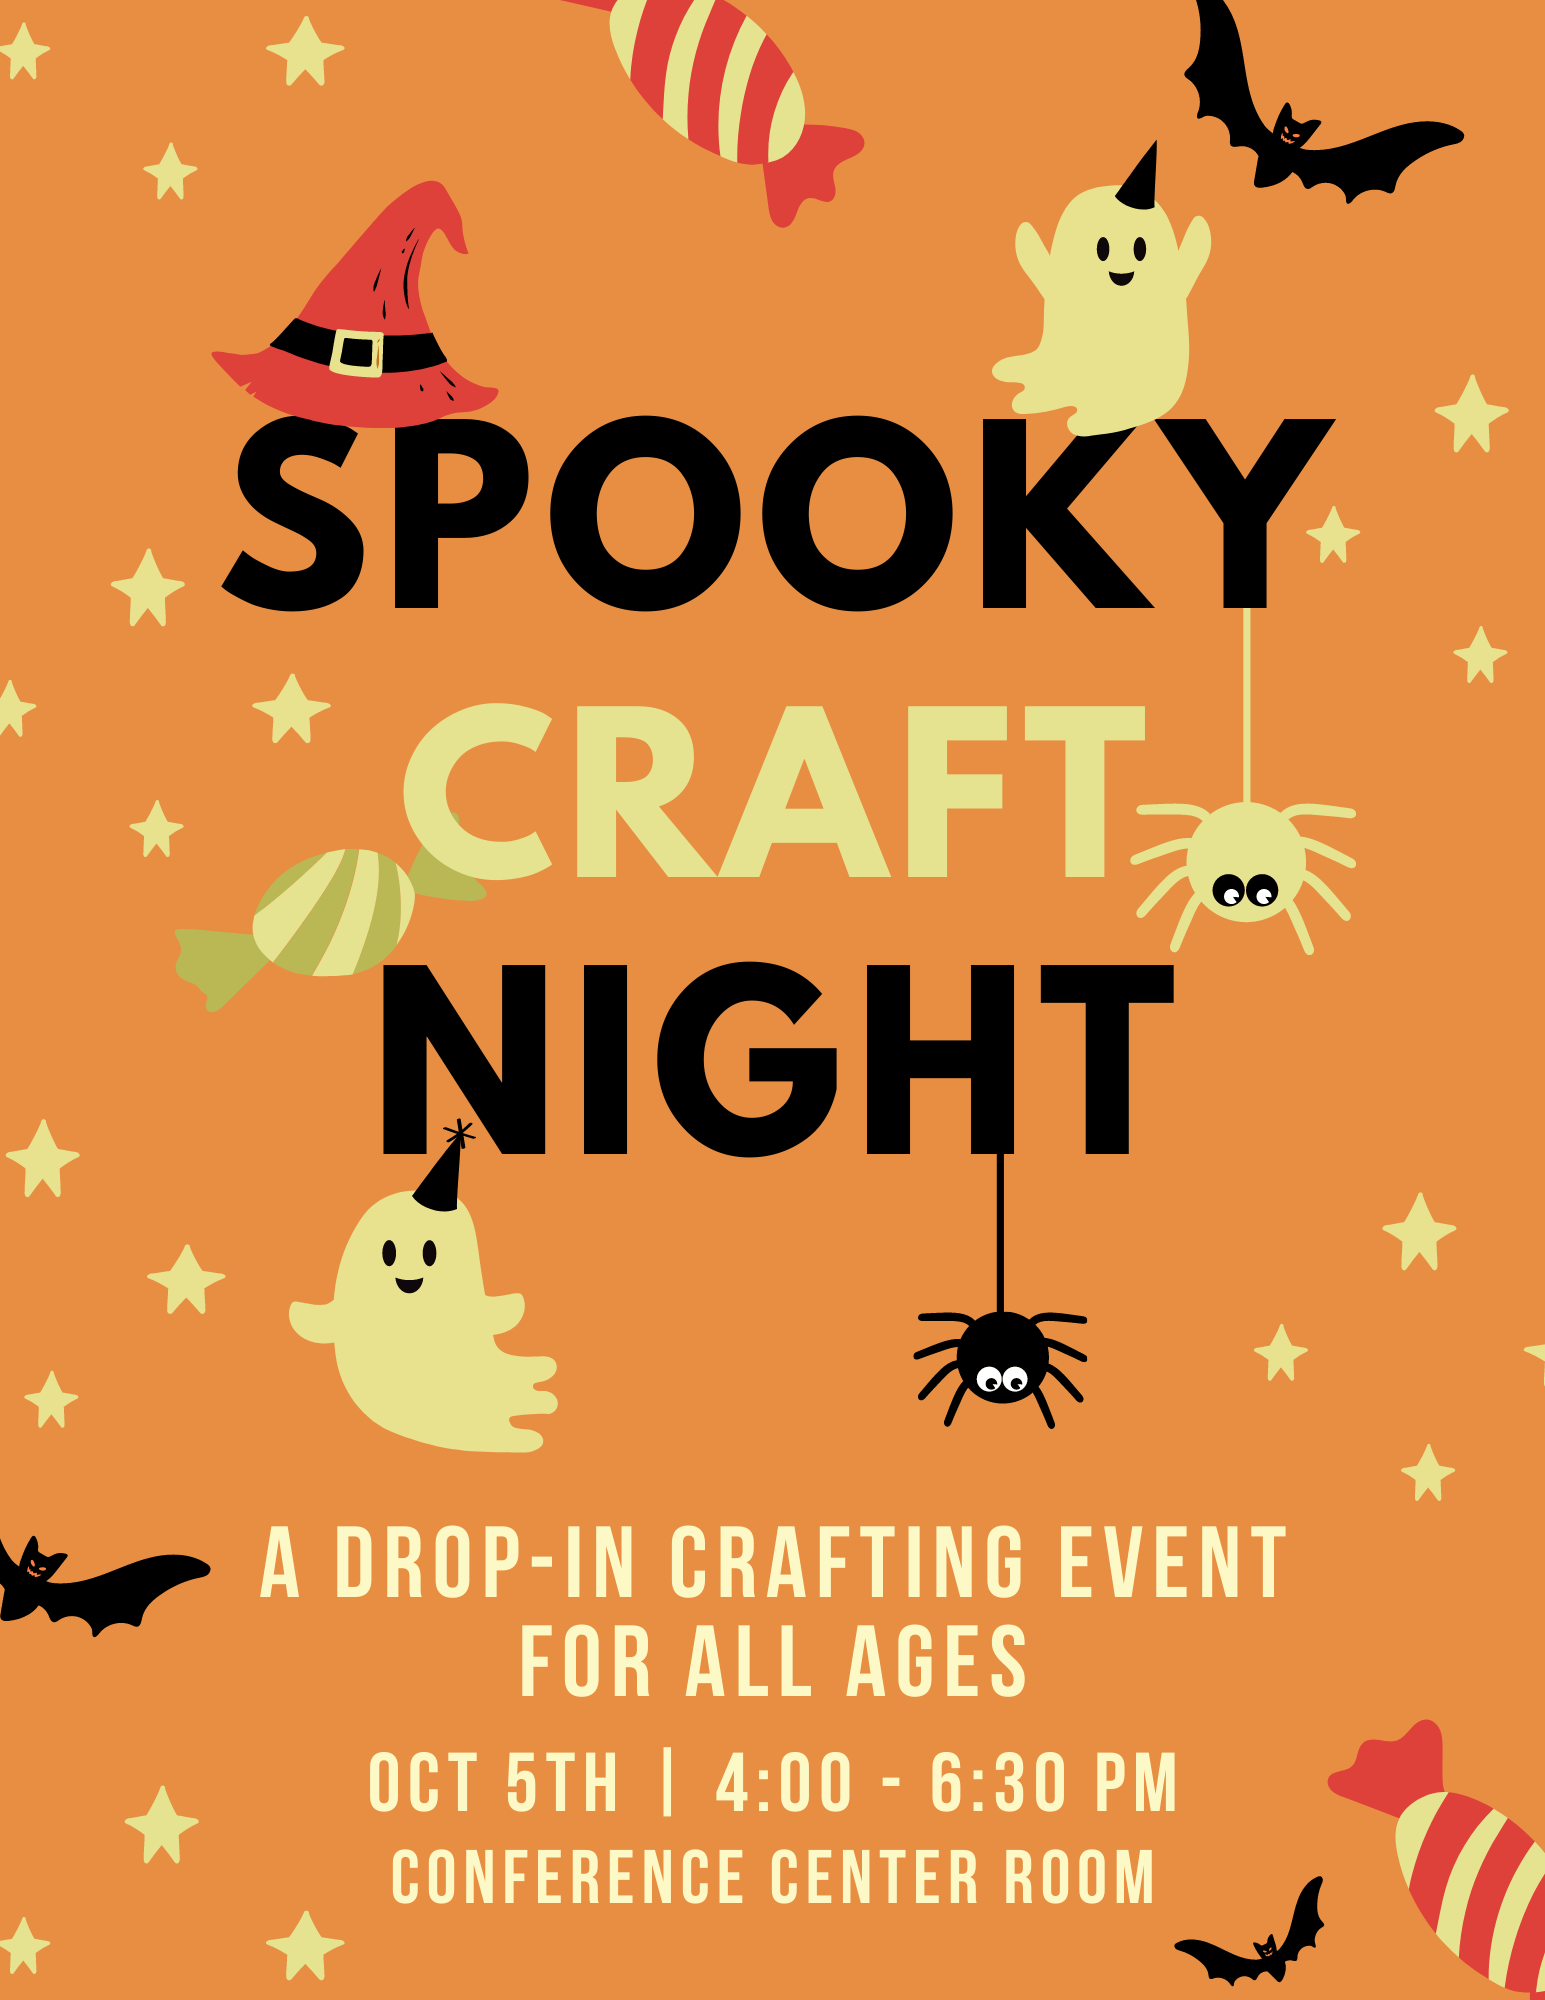 Spooky Craft Night A drop-in crafting event for all ages October 5 4:00-6:30PM in the Conference Center Room